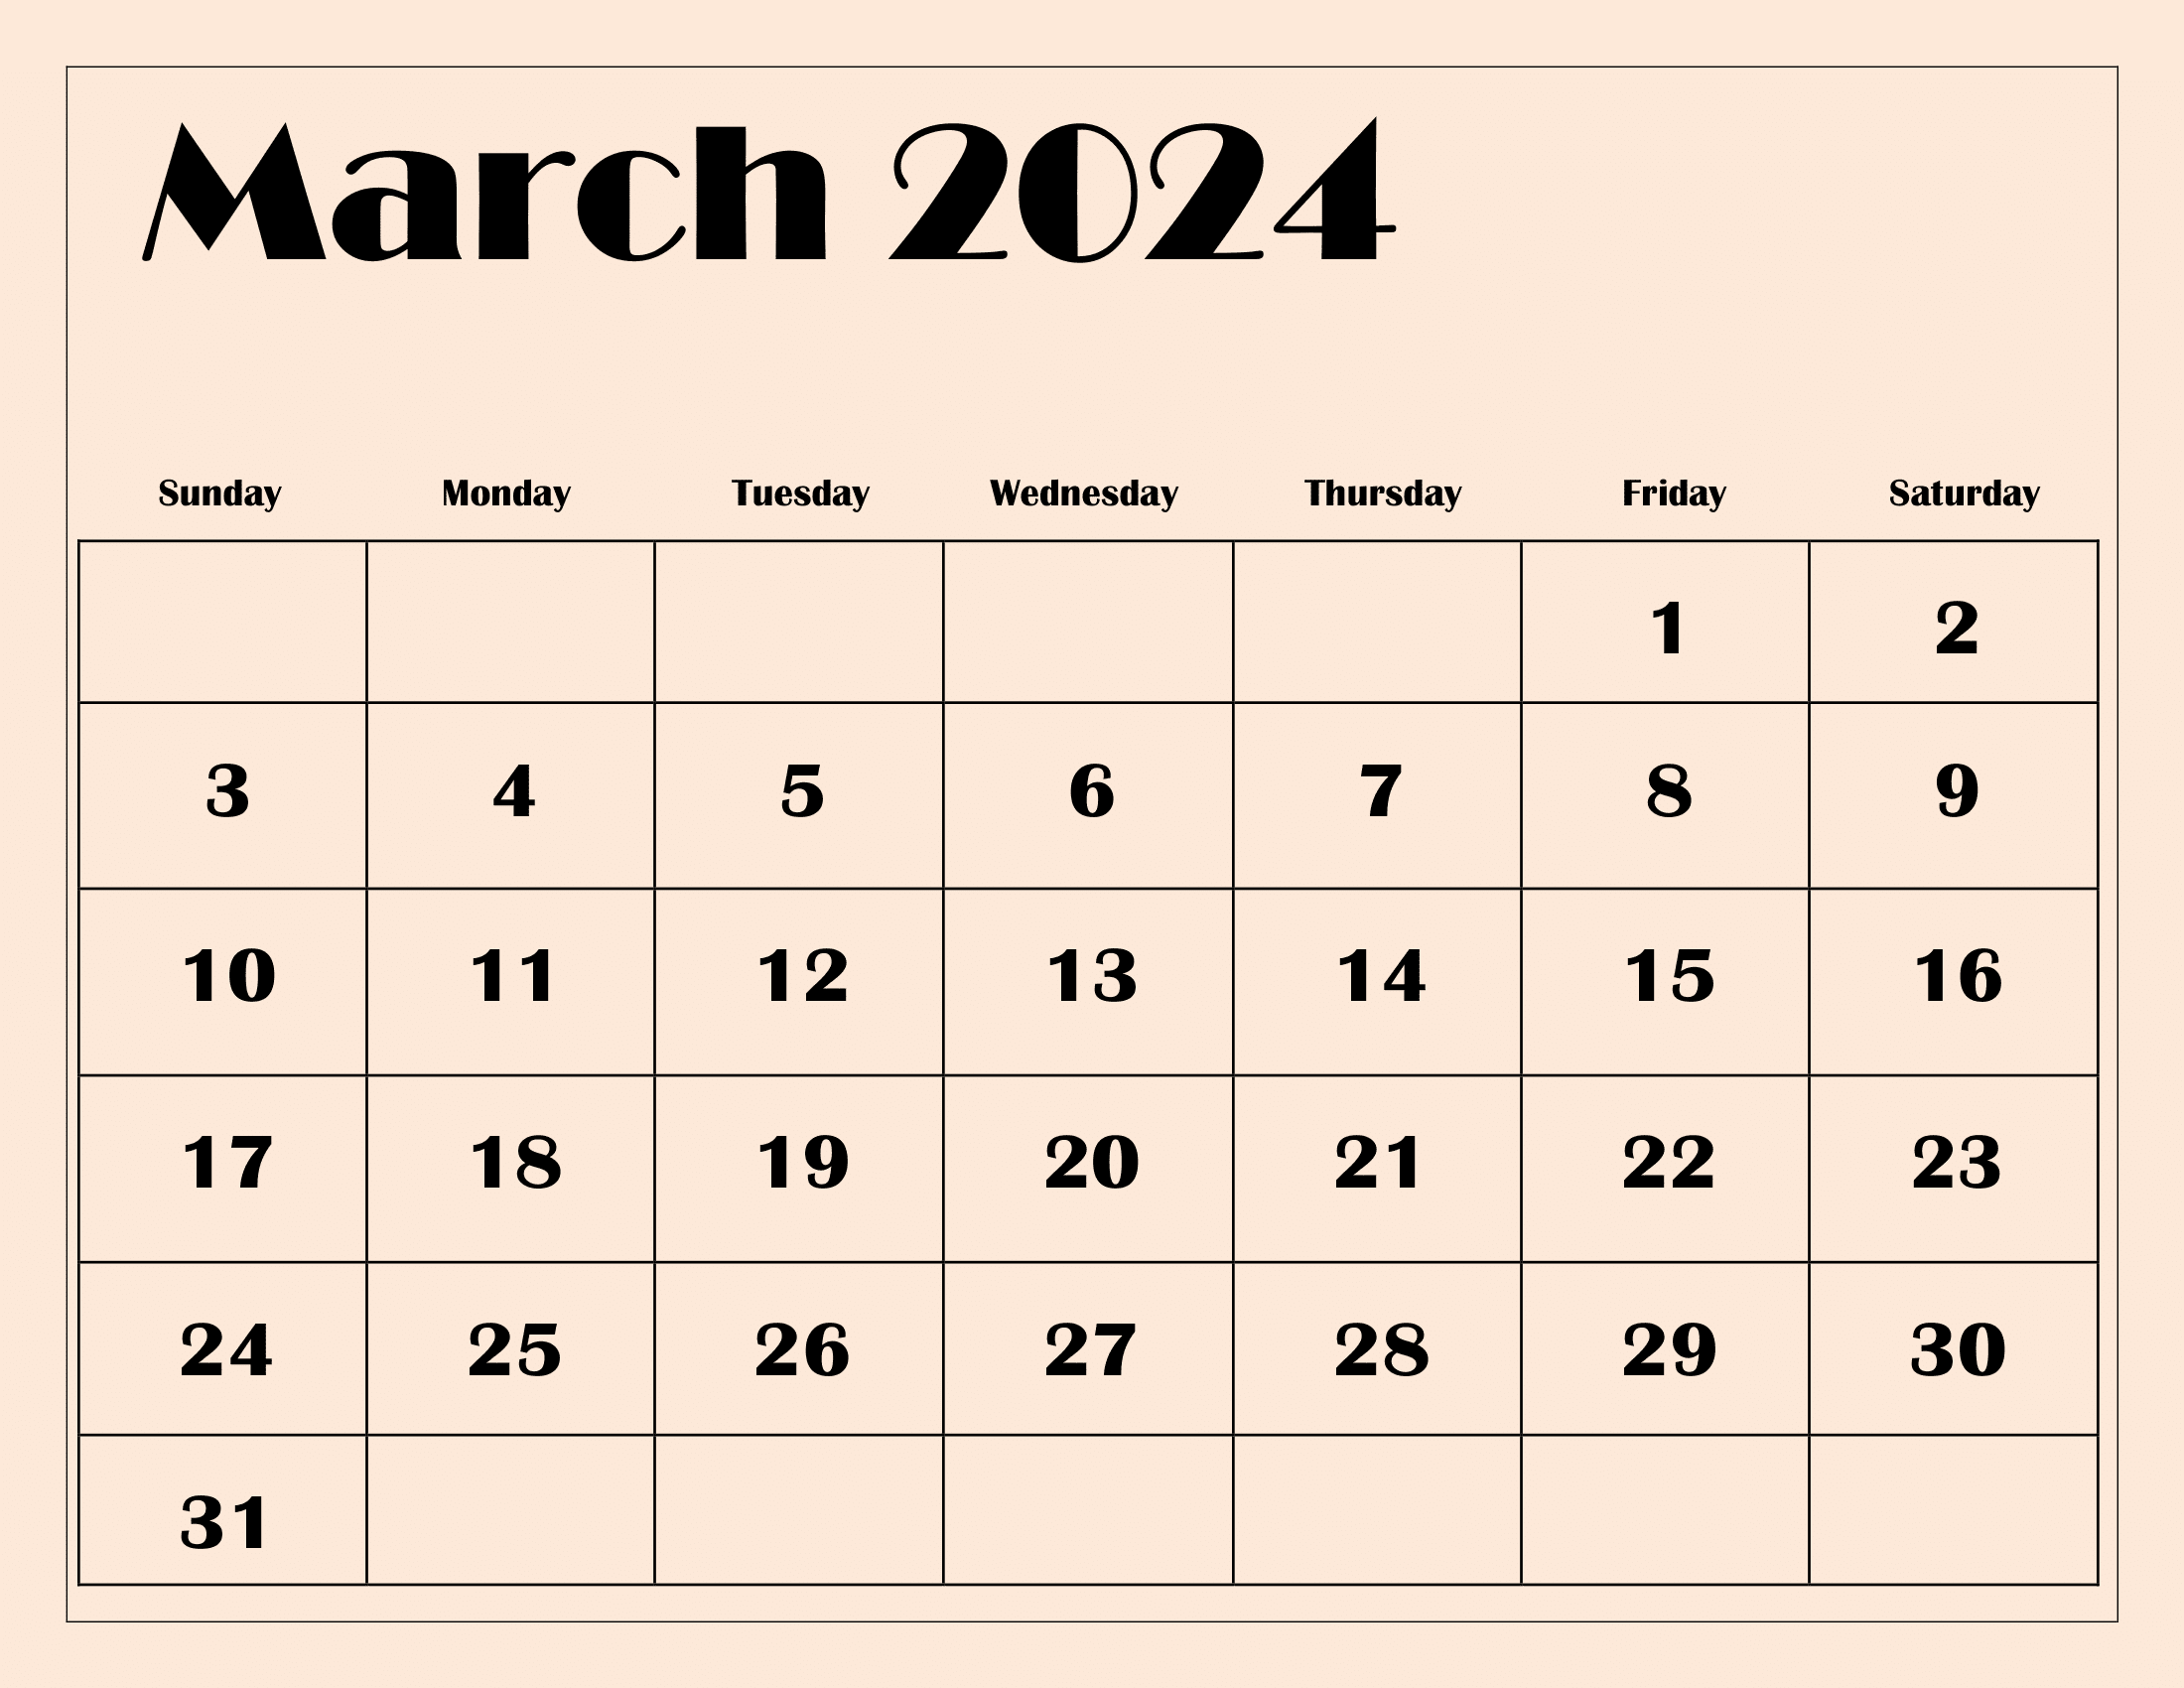 March 2024 Calendar Printable Pdf With Holidays Template Free with Free Printable Blank March Calendar 2024